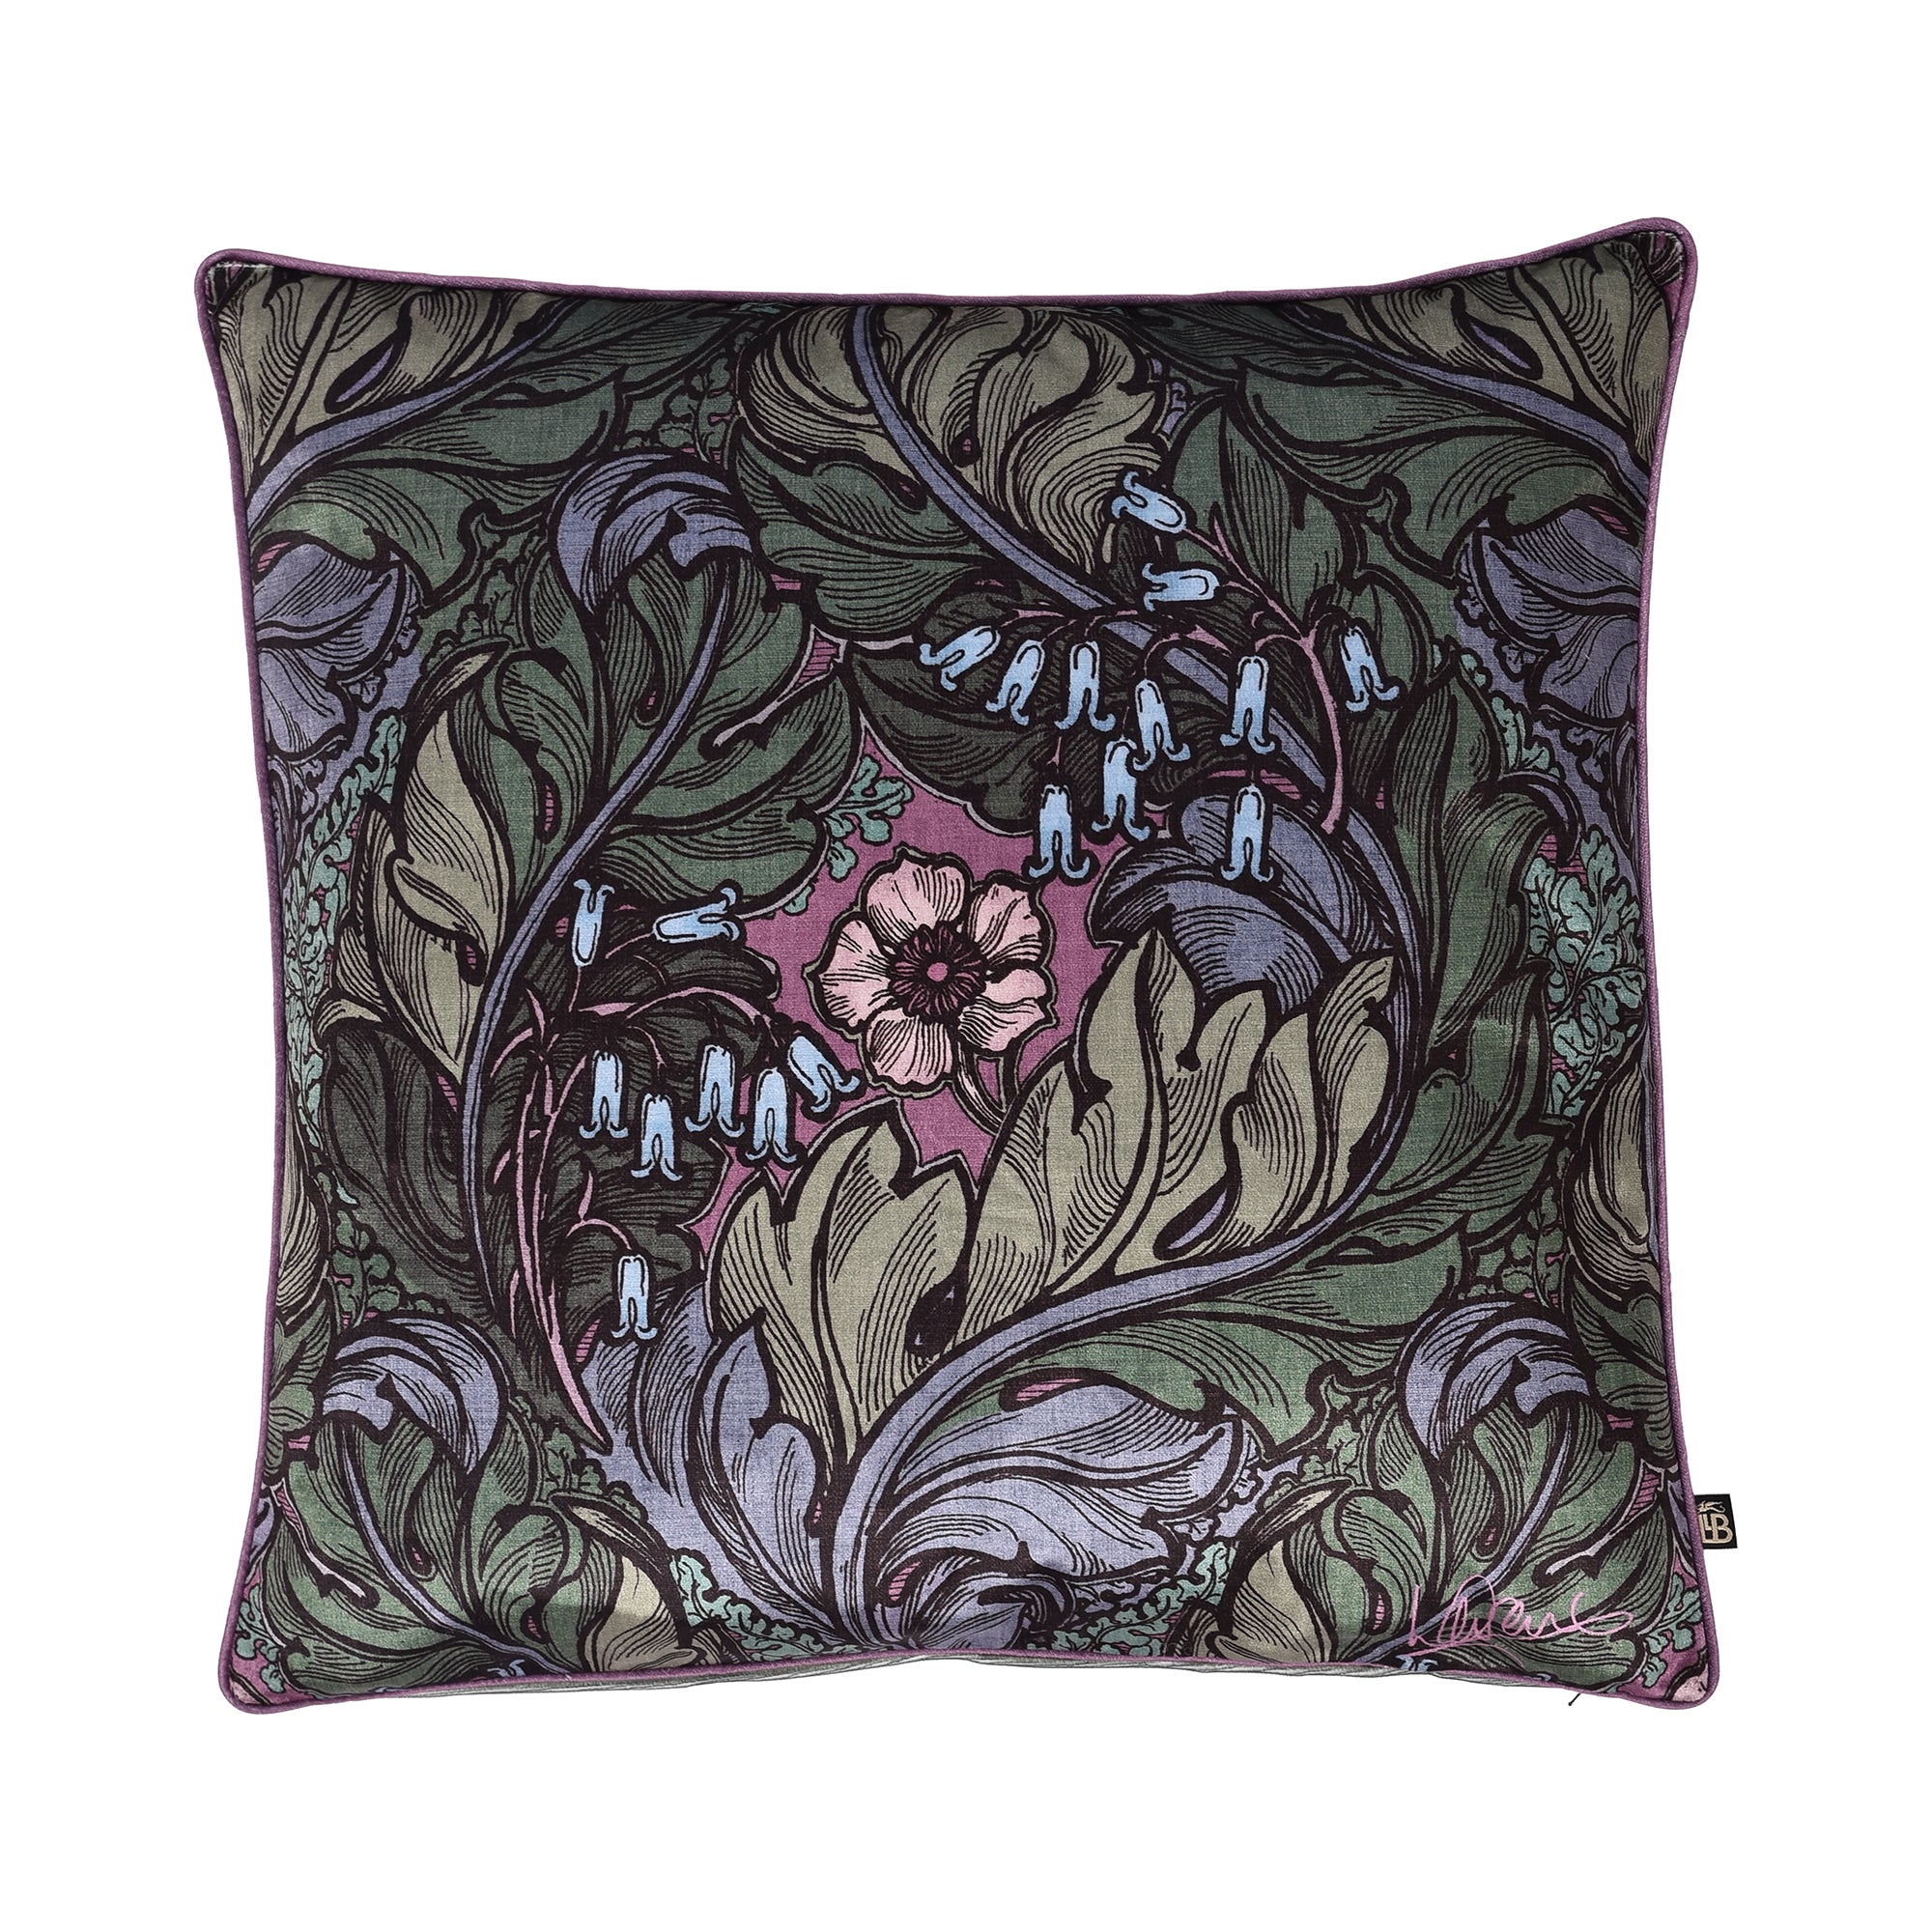 Cushion Cover Rambleicious by Laurence Llewelyn-Bowen in Multi